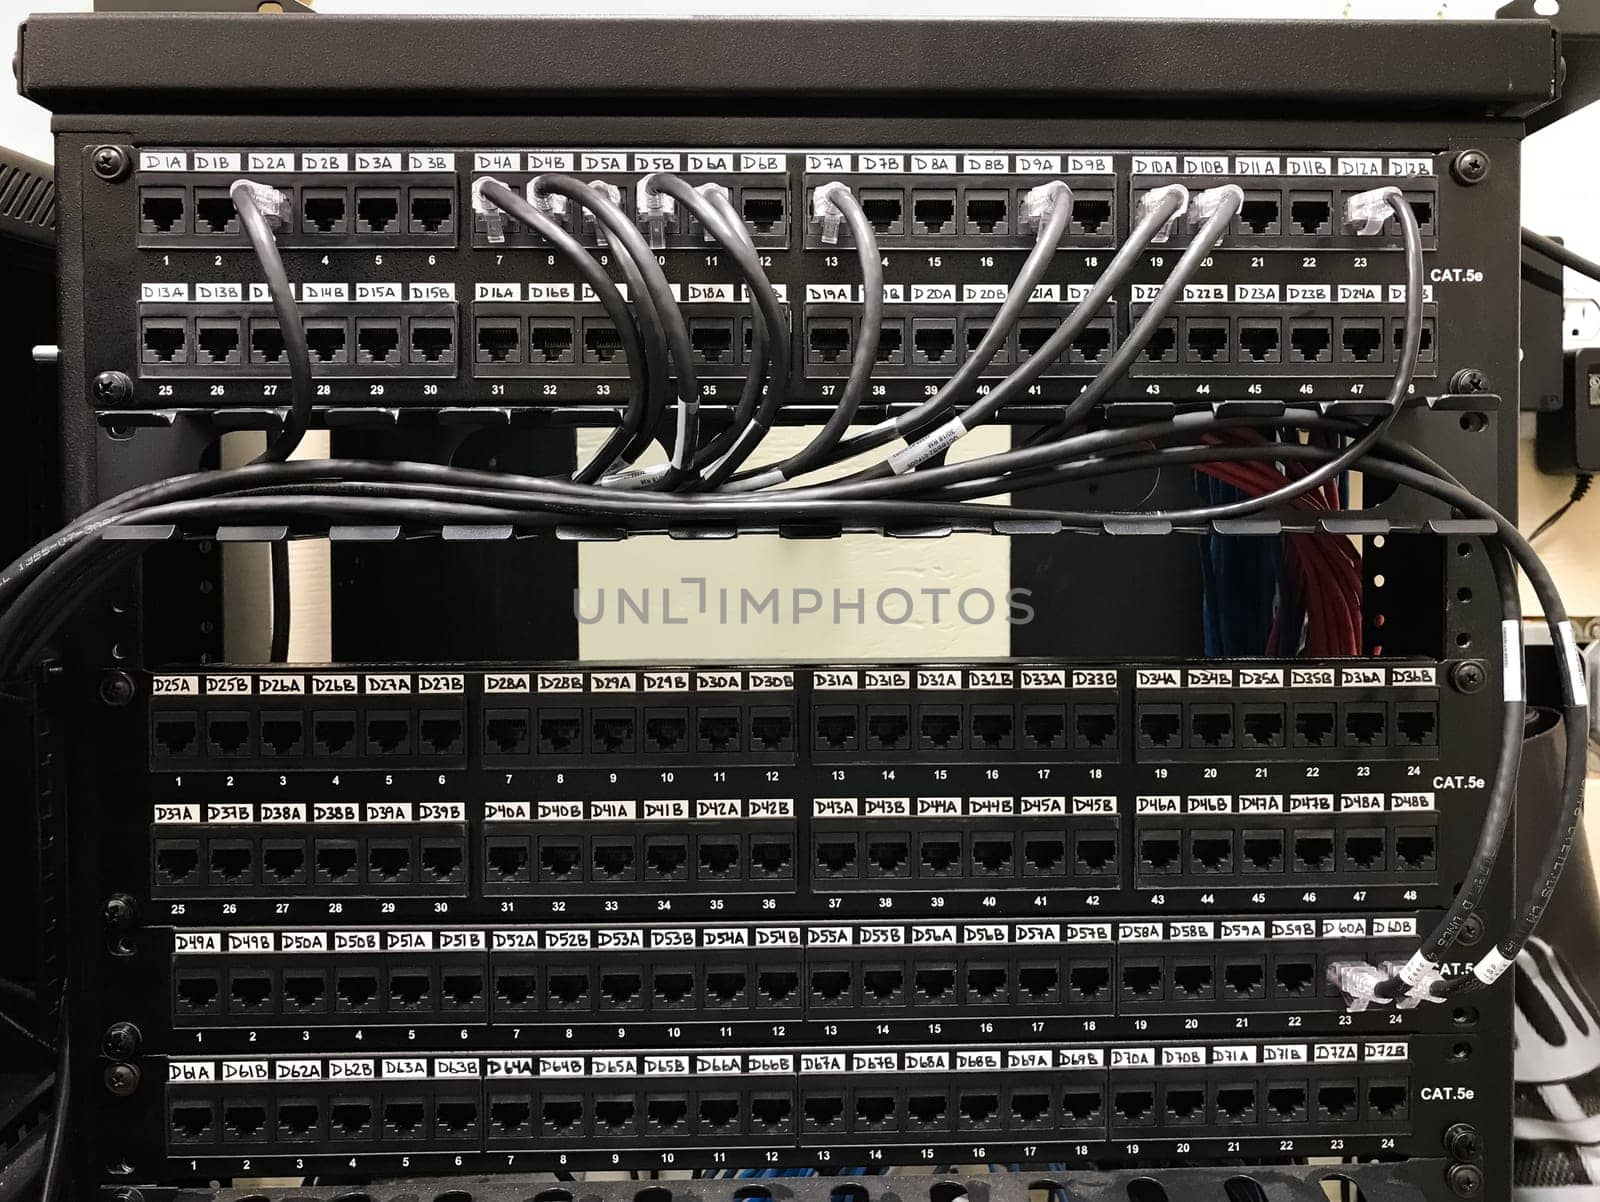 Enumerated ethernet patch panels with cables connected to the ports. Communication closet with patch panels mounted on the rack